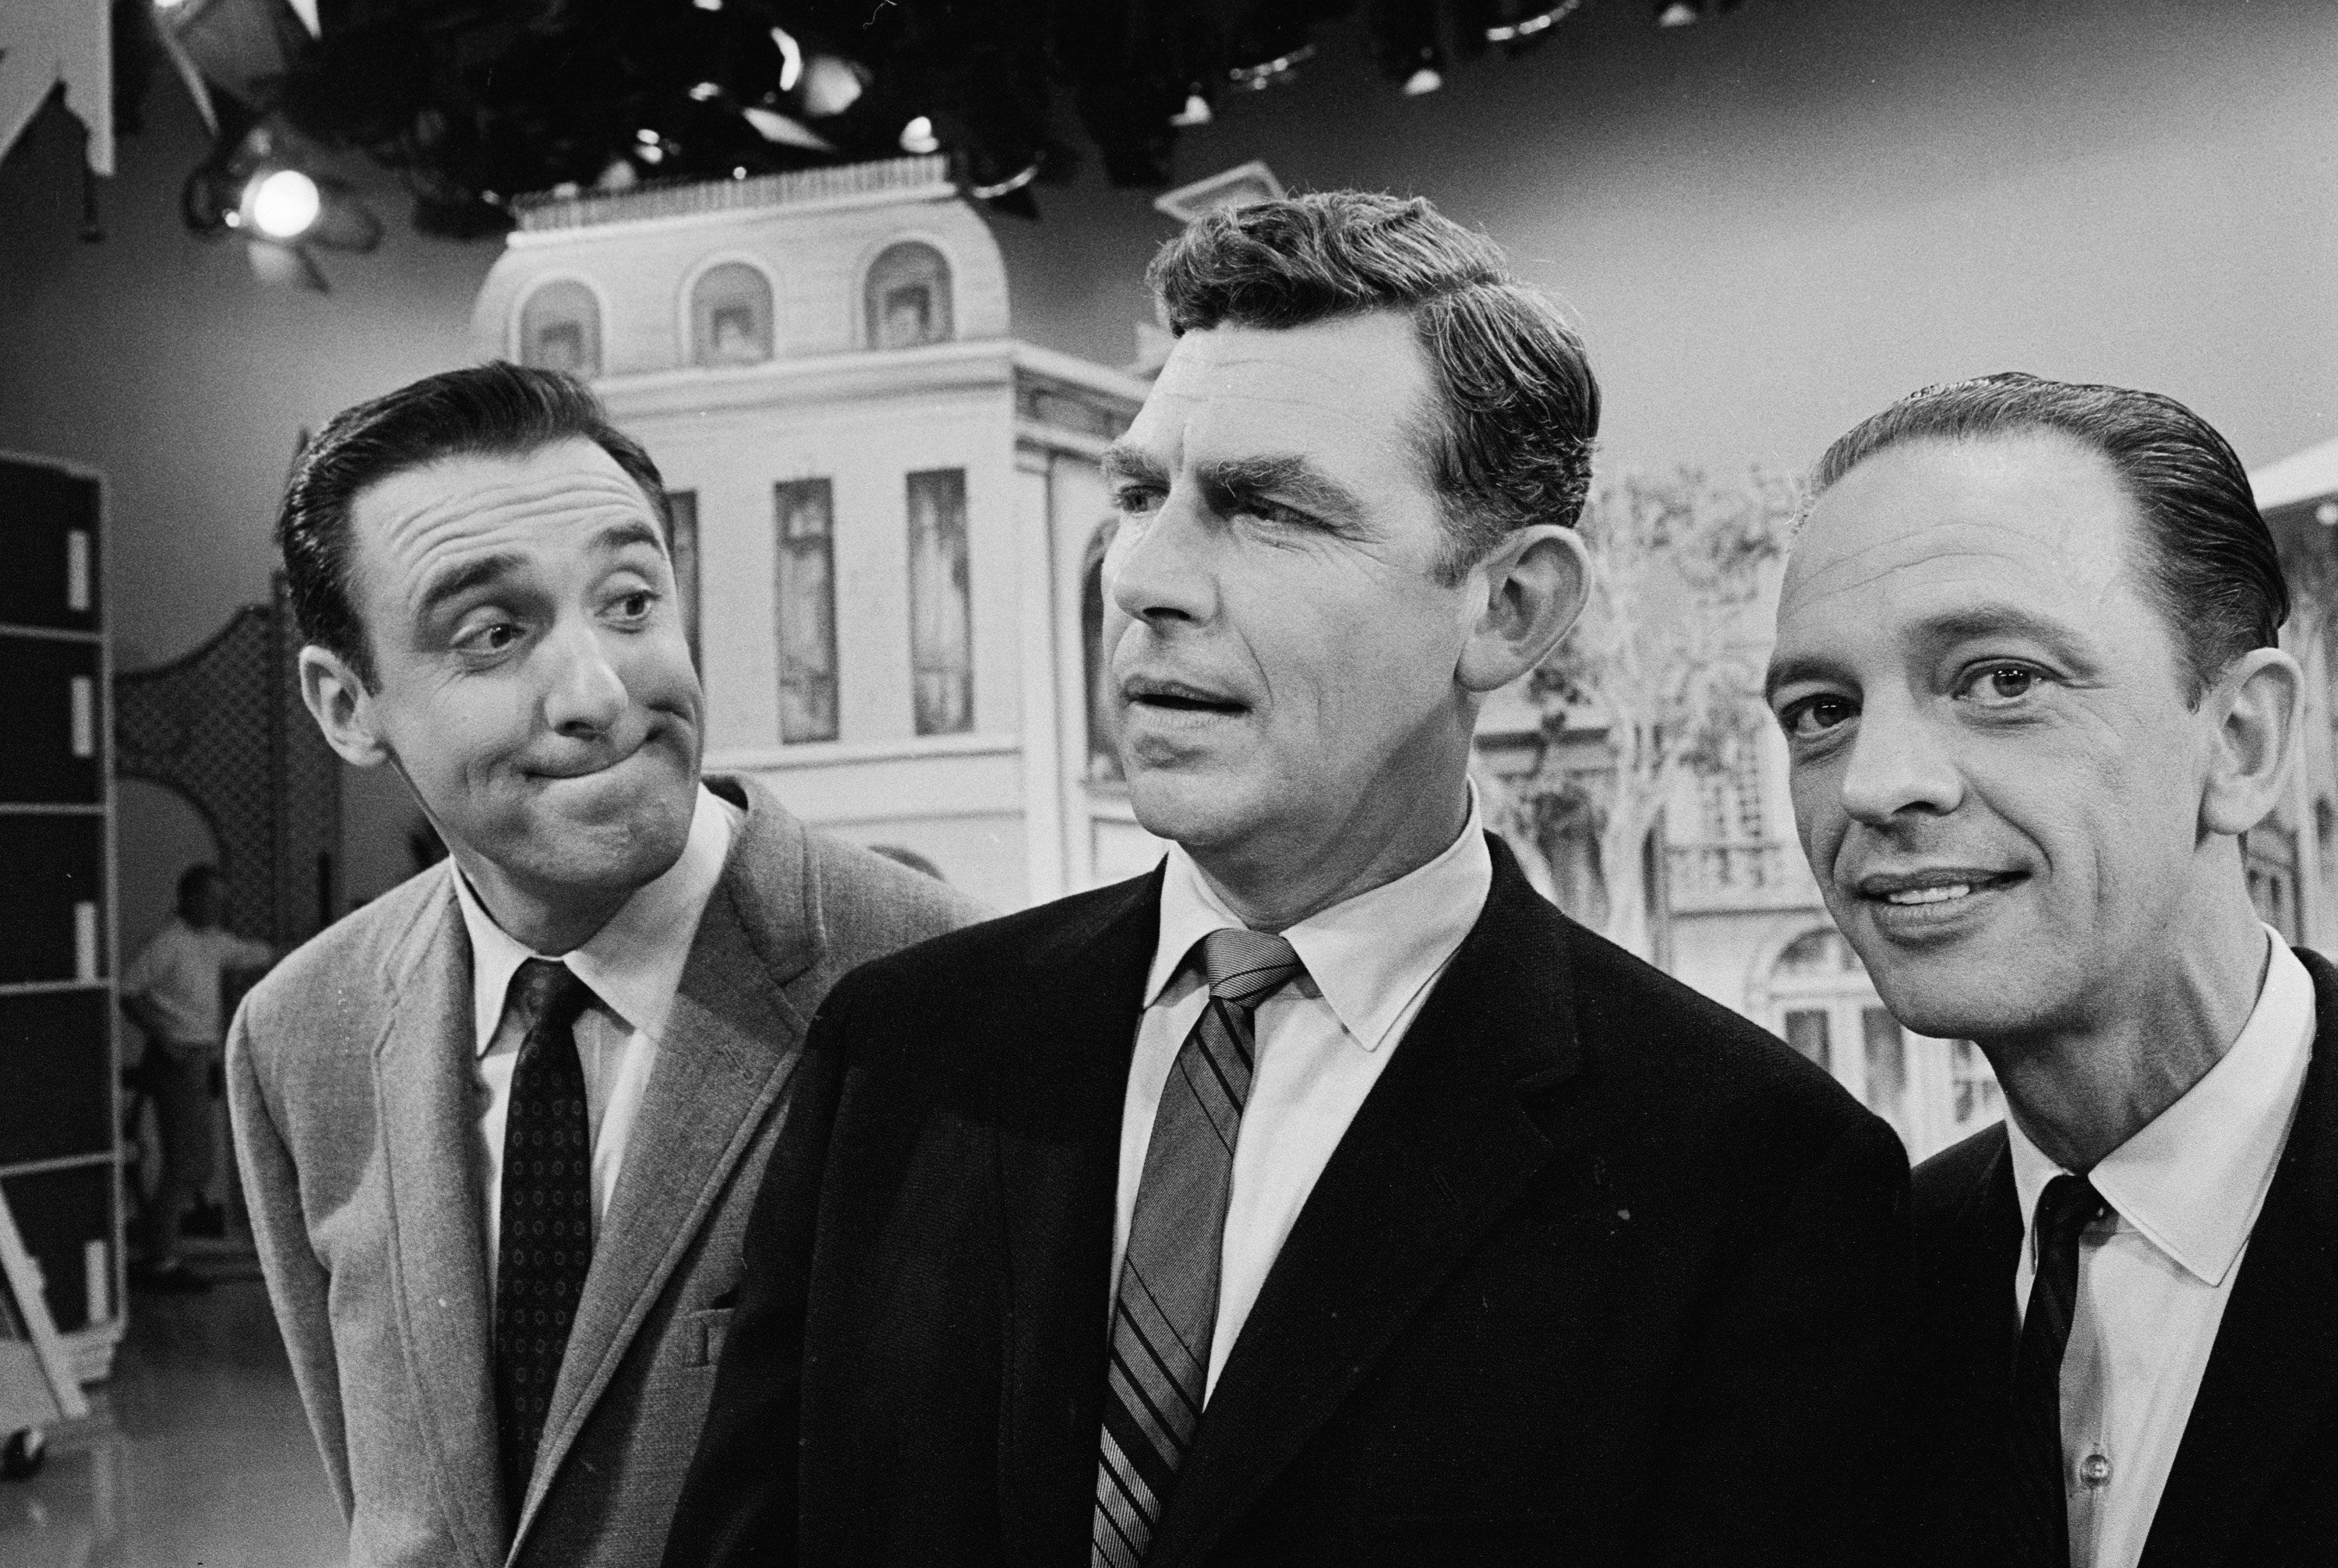 Jim Nabors, Andy Griffith, and Don Knotts